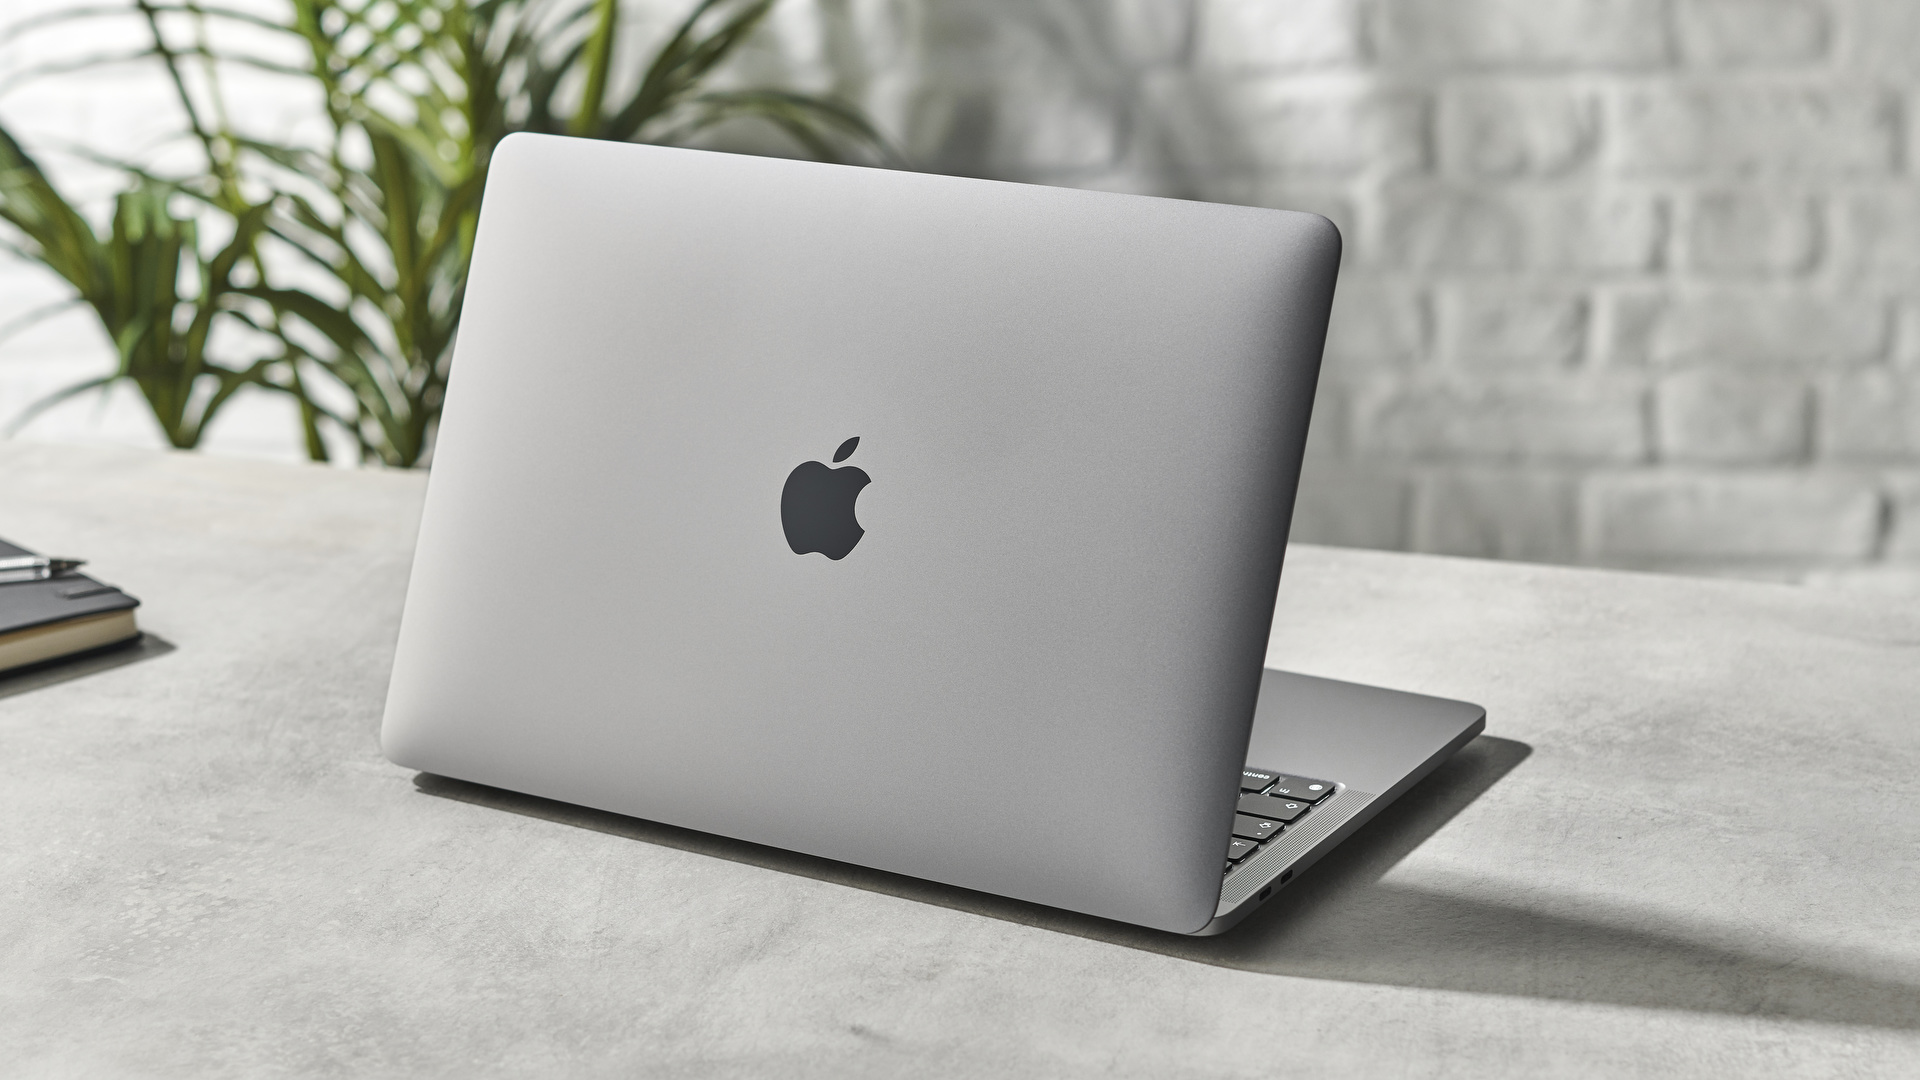 Apple MacBook Pro 13-inch (M1, 2020) on a desk next to a notebook in front of a white brick wall